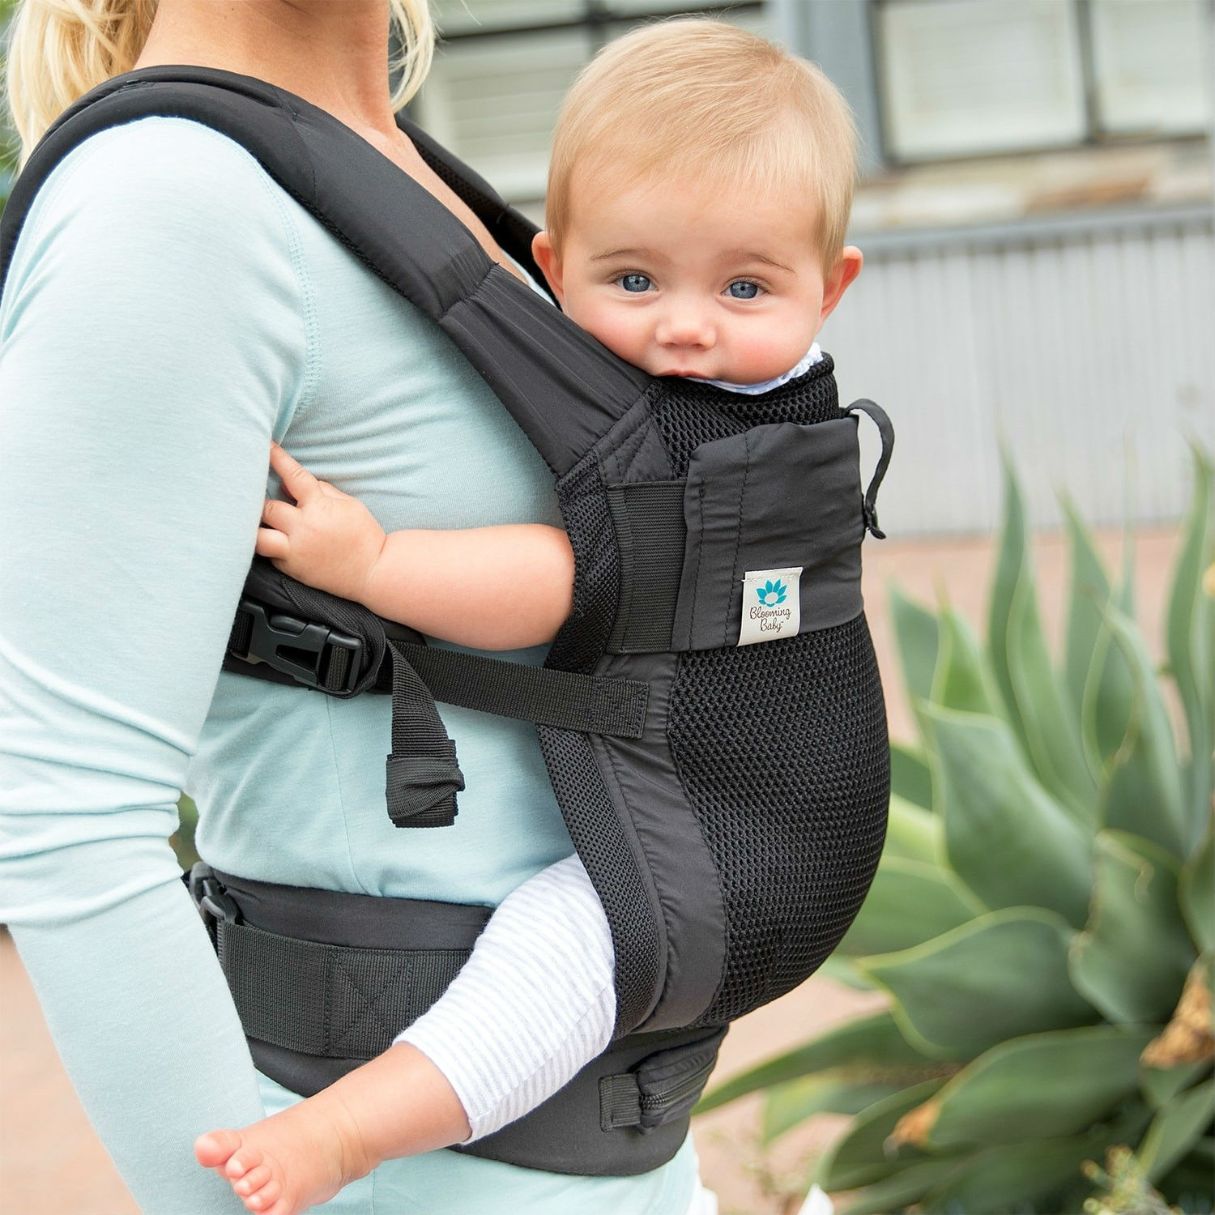 How To Store Baby Carriers